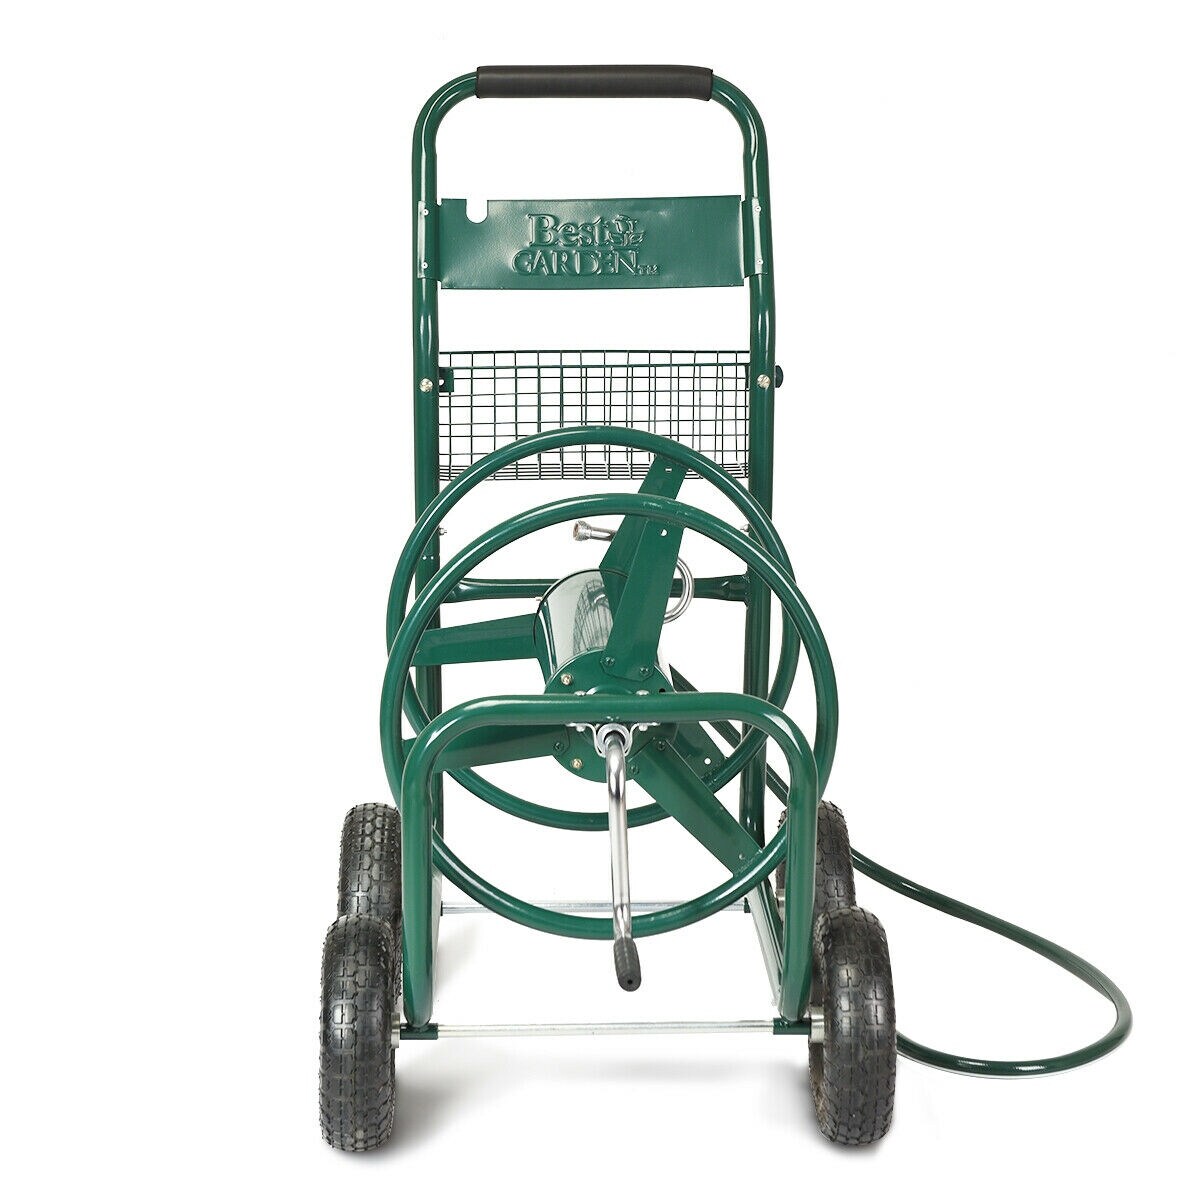 Holds Up to 300FT New Garden Hose Reel Cart 4 Wheel with Basket Lawn Watering Outdoor Heavy Duty Yard Water Planting Tubular Steel with Green Powder Coated Best Outdoor Garden Hose Reel Cart 